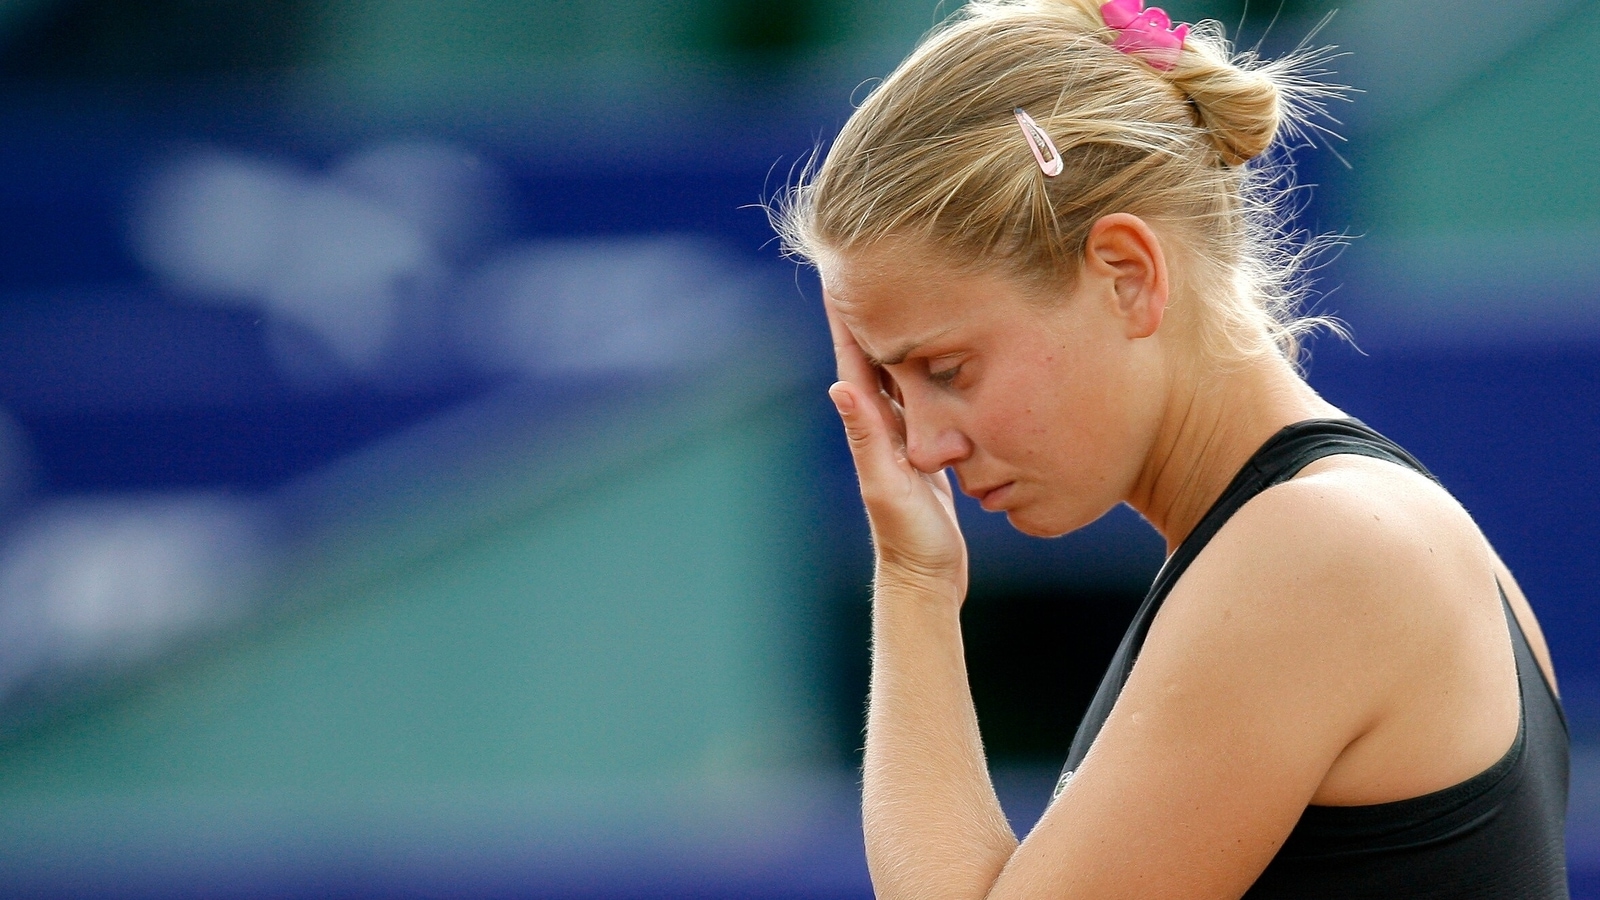 Jelena Dokic reveals she had suicidal thoughts before seeking help